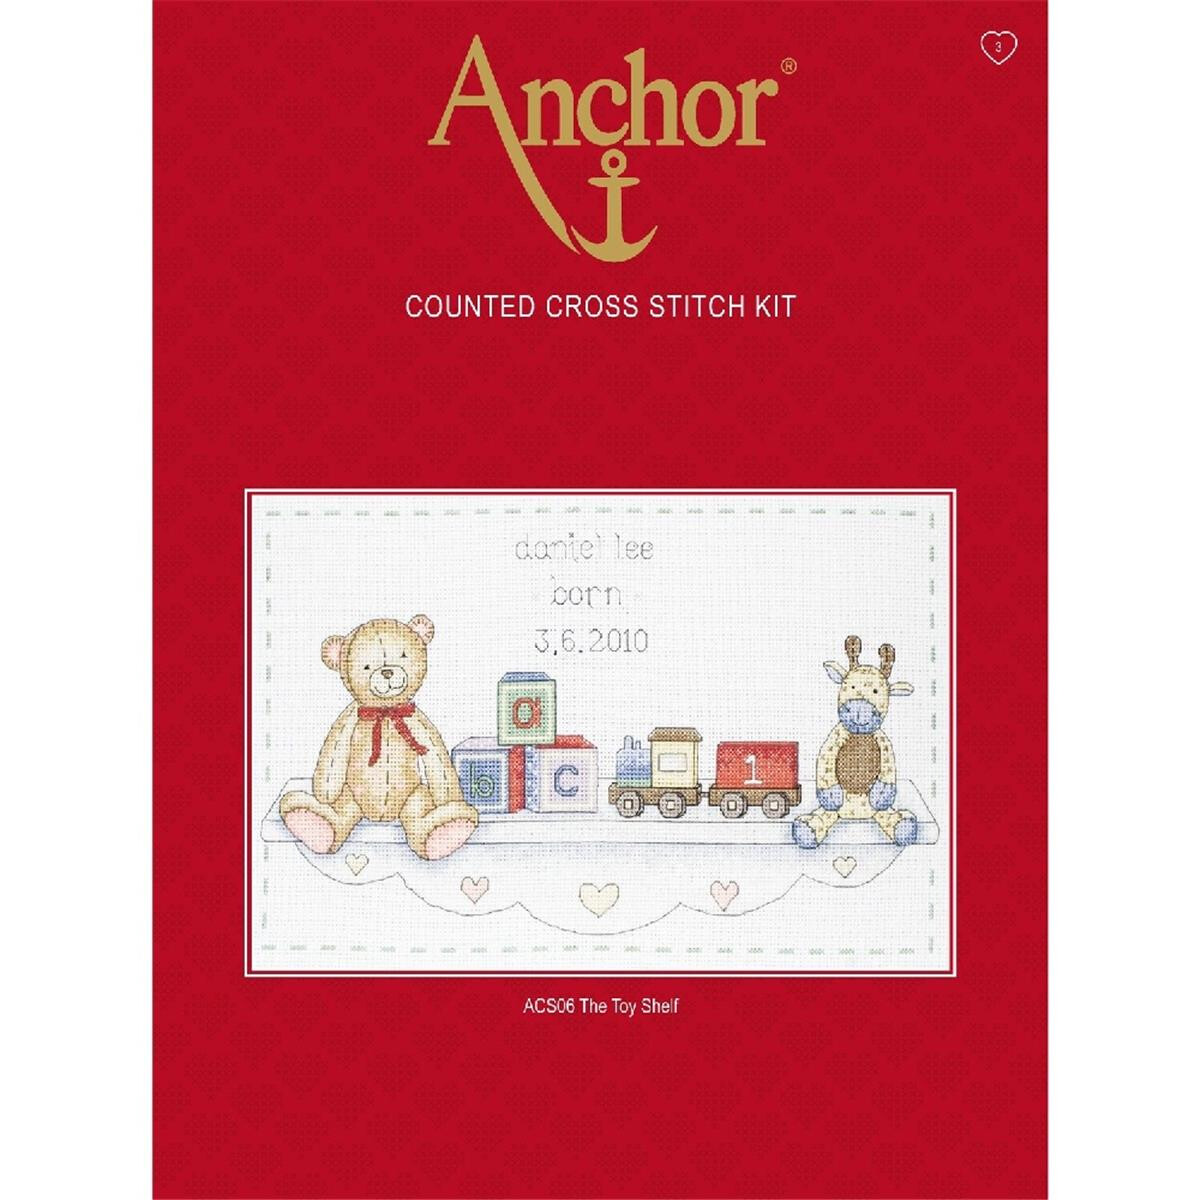 Anchor counted Cross Stitch kit "The Toy Shelf Birth...